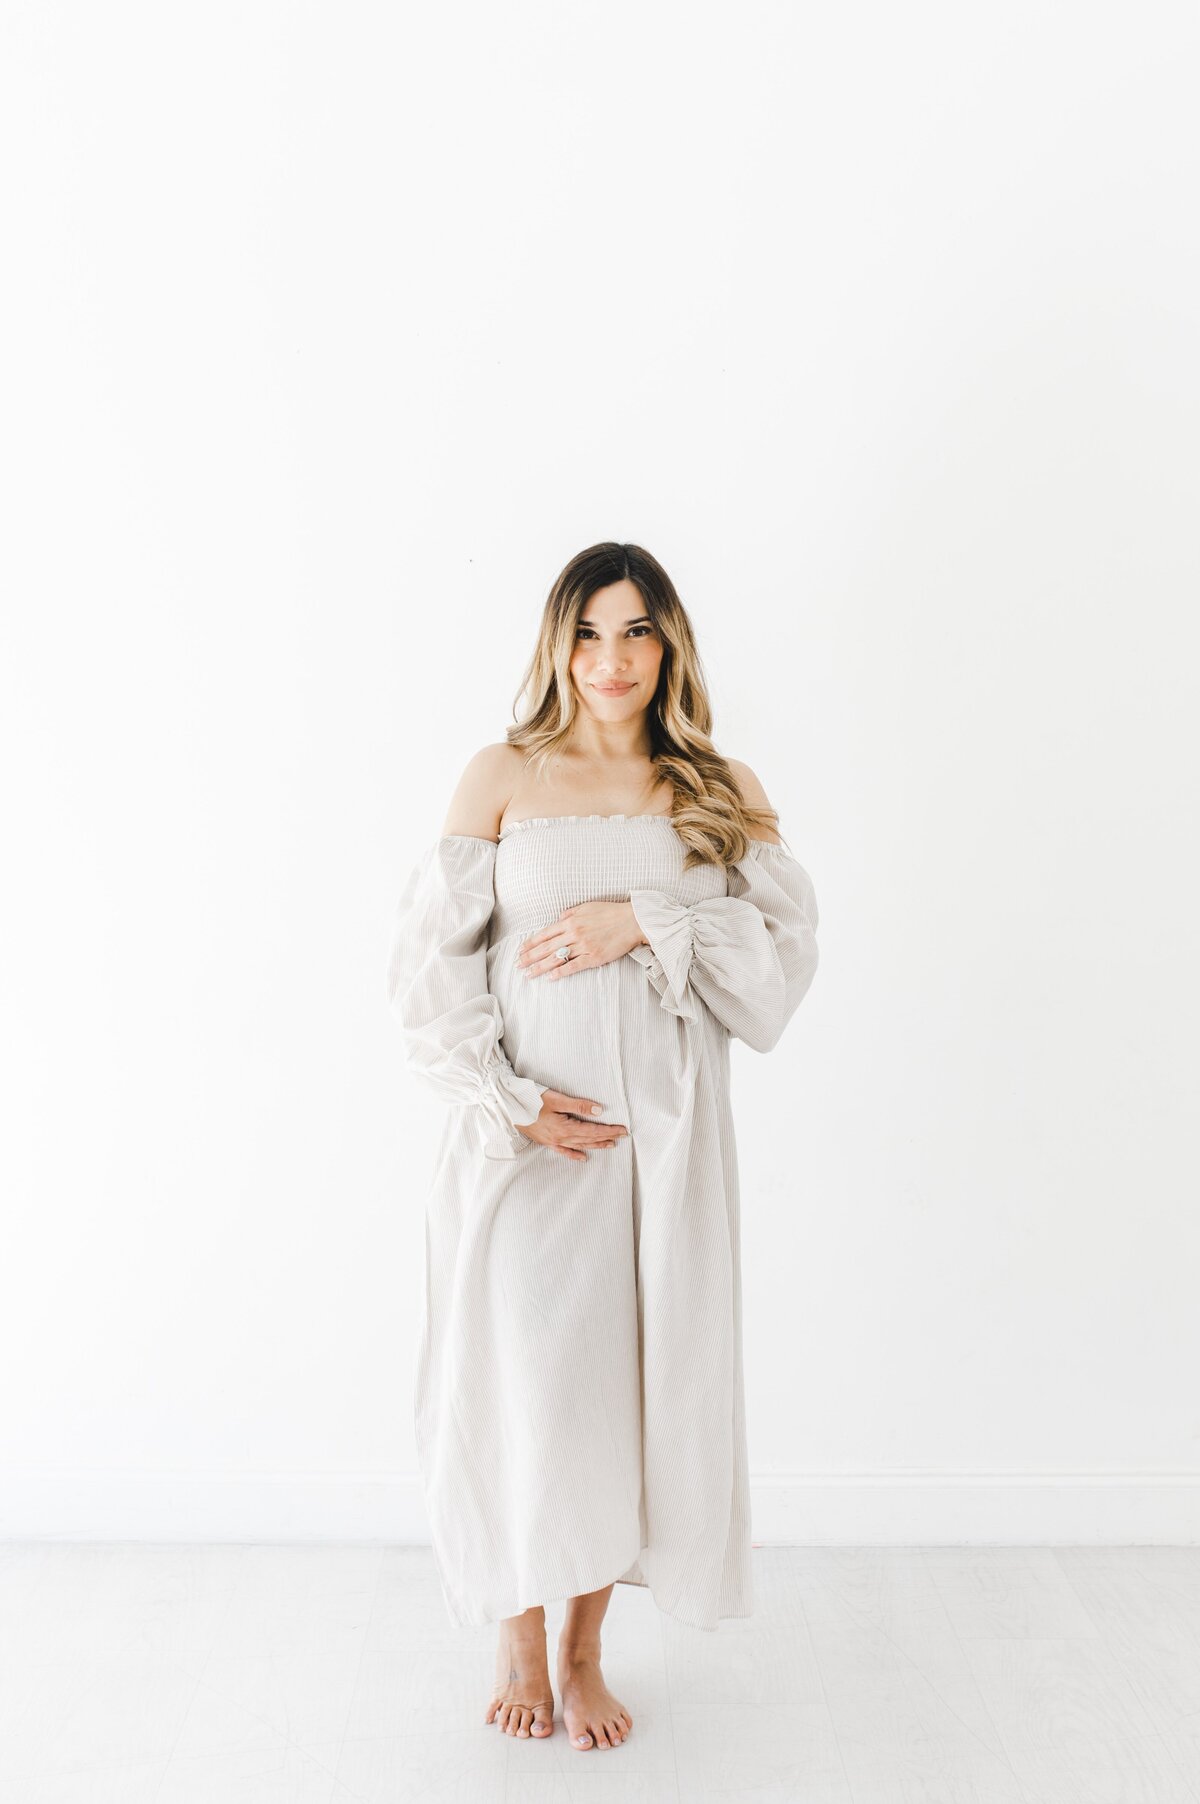 Simple maternity session